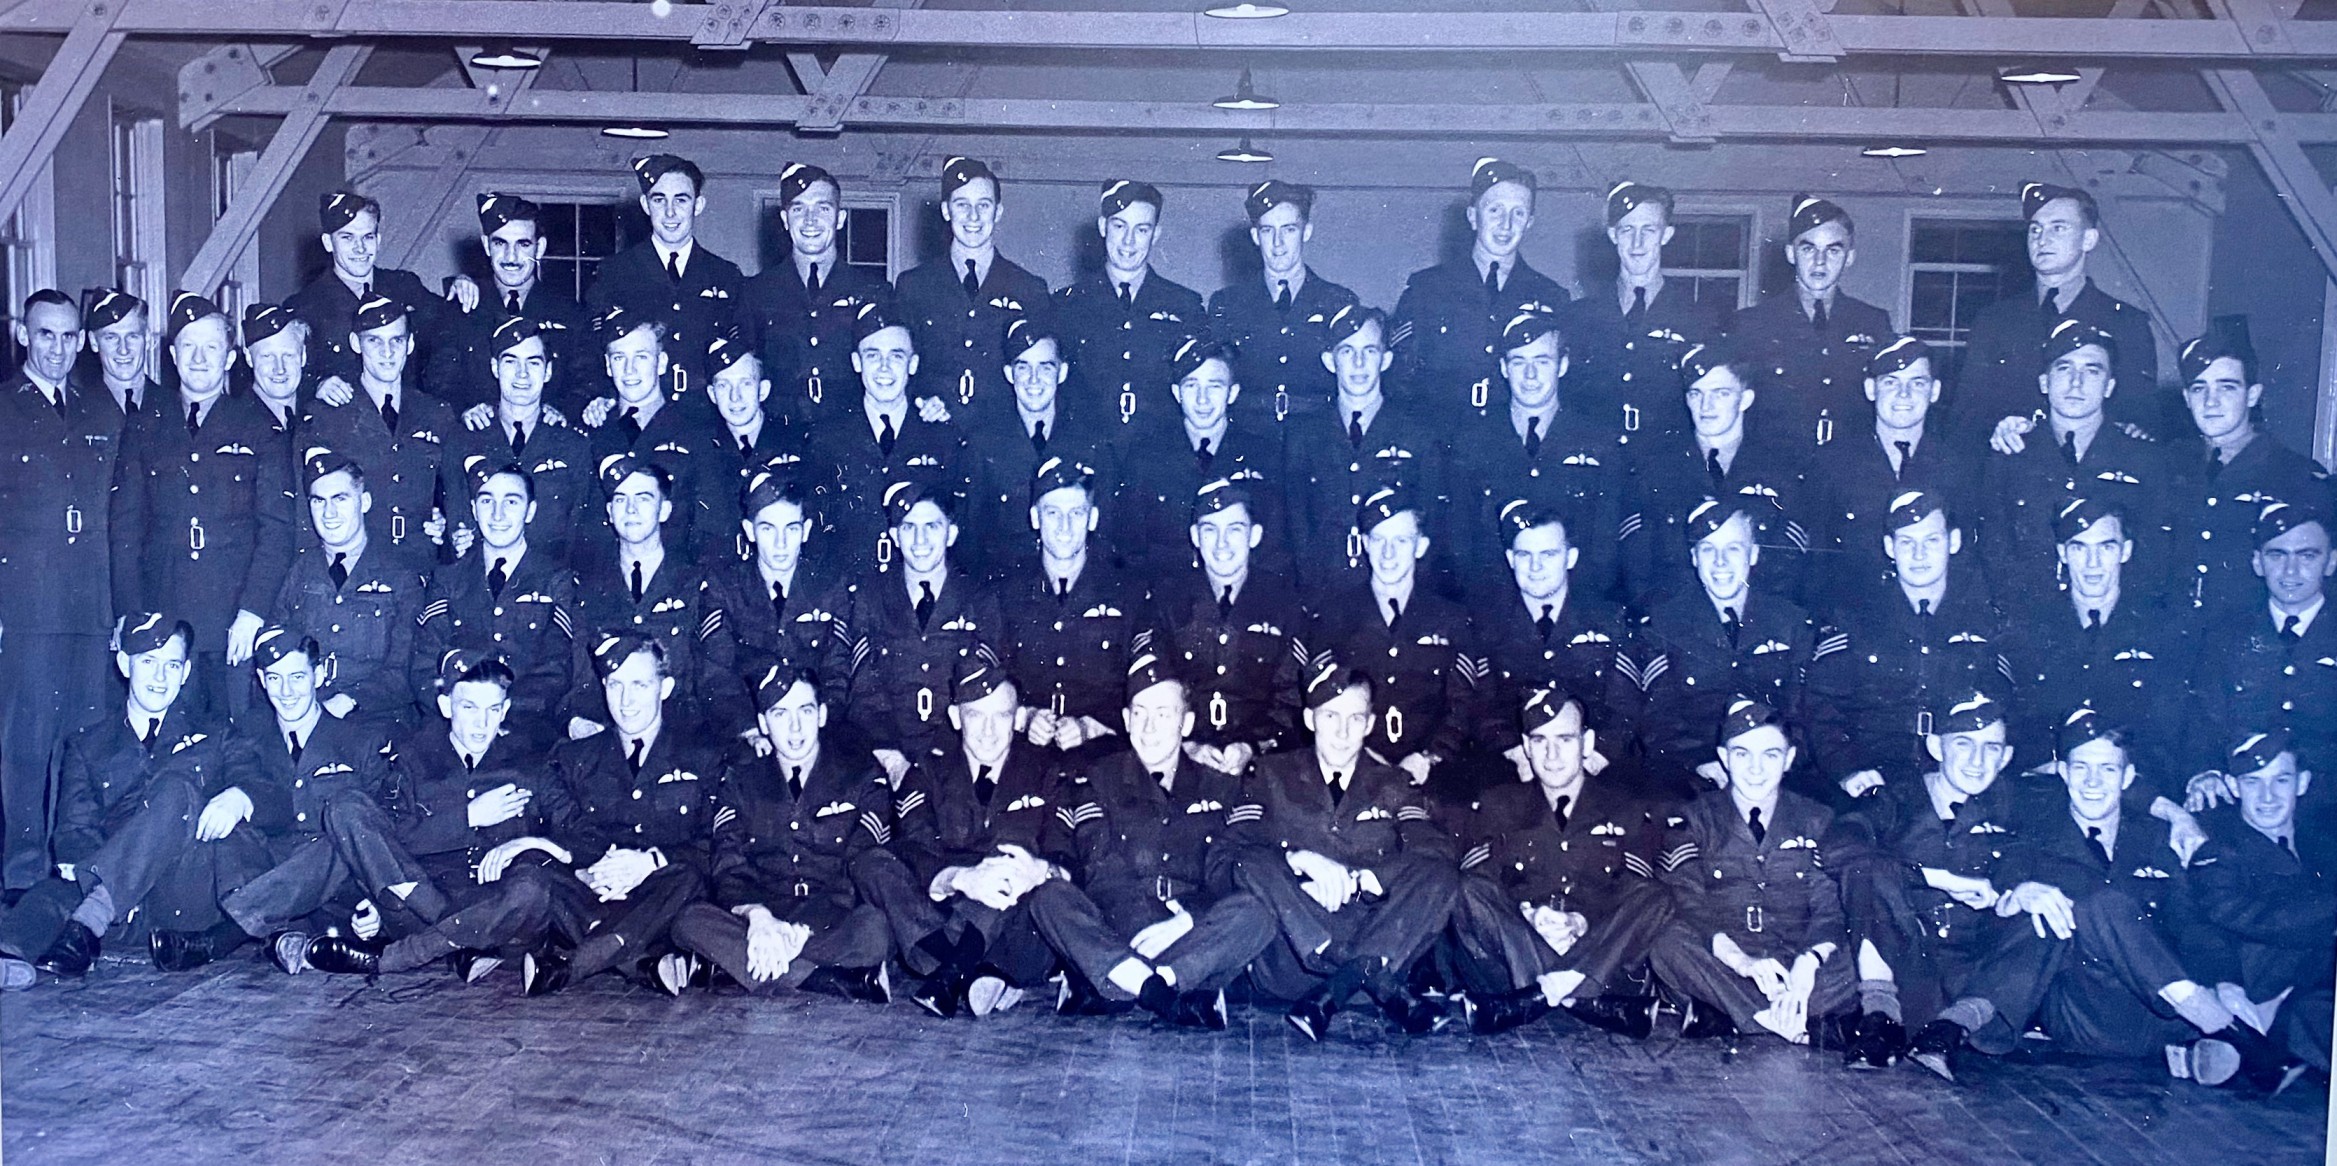 Military uniformed young men sitting and standing for a picture